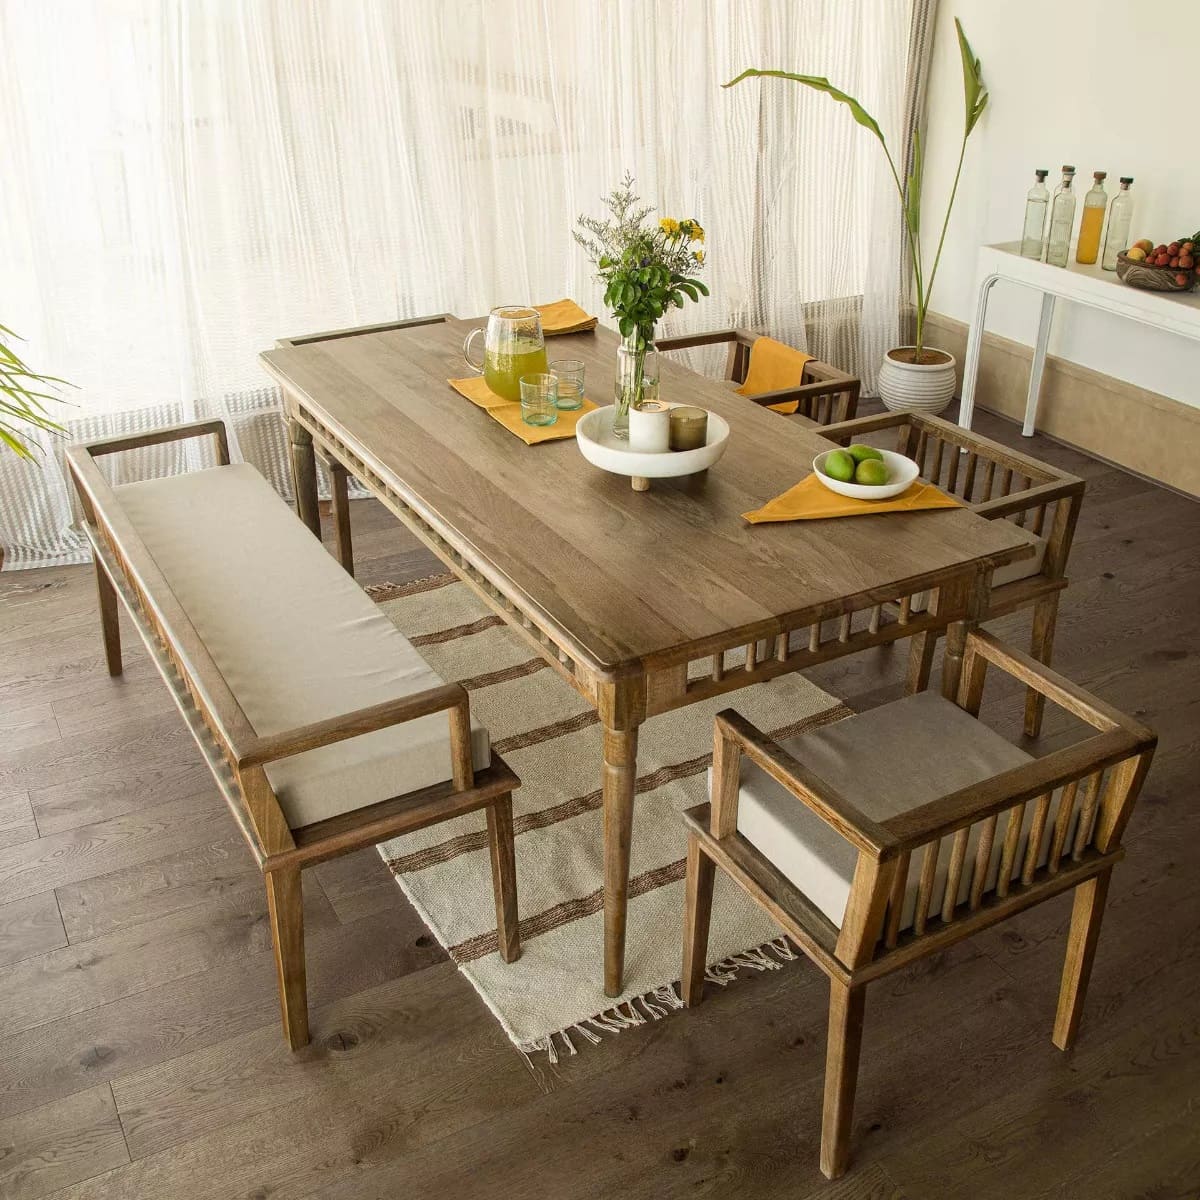 How To Assemble A Dining Table